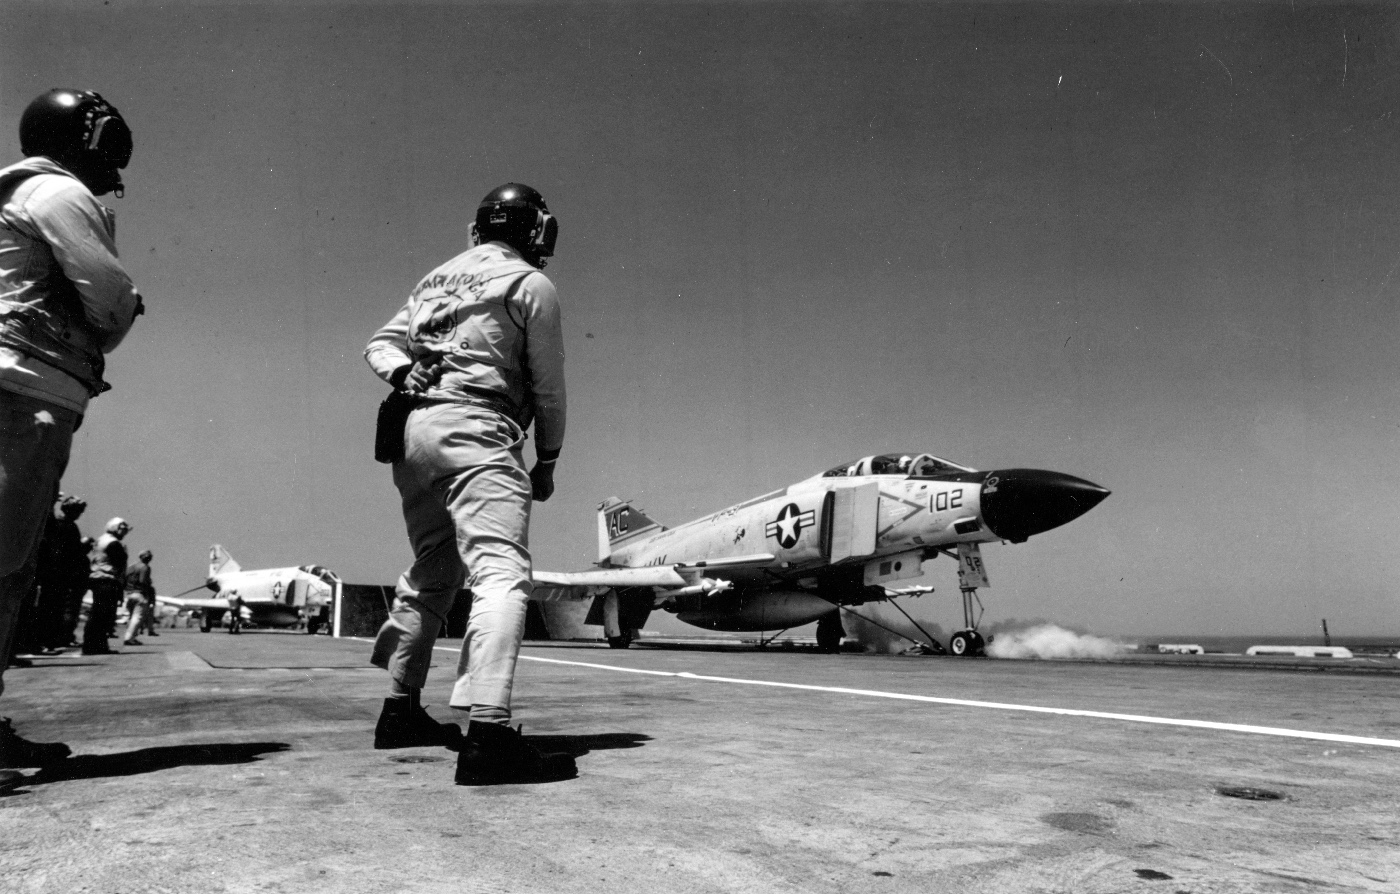 f-4b launches from the uss saratoga